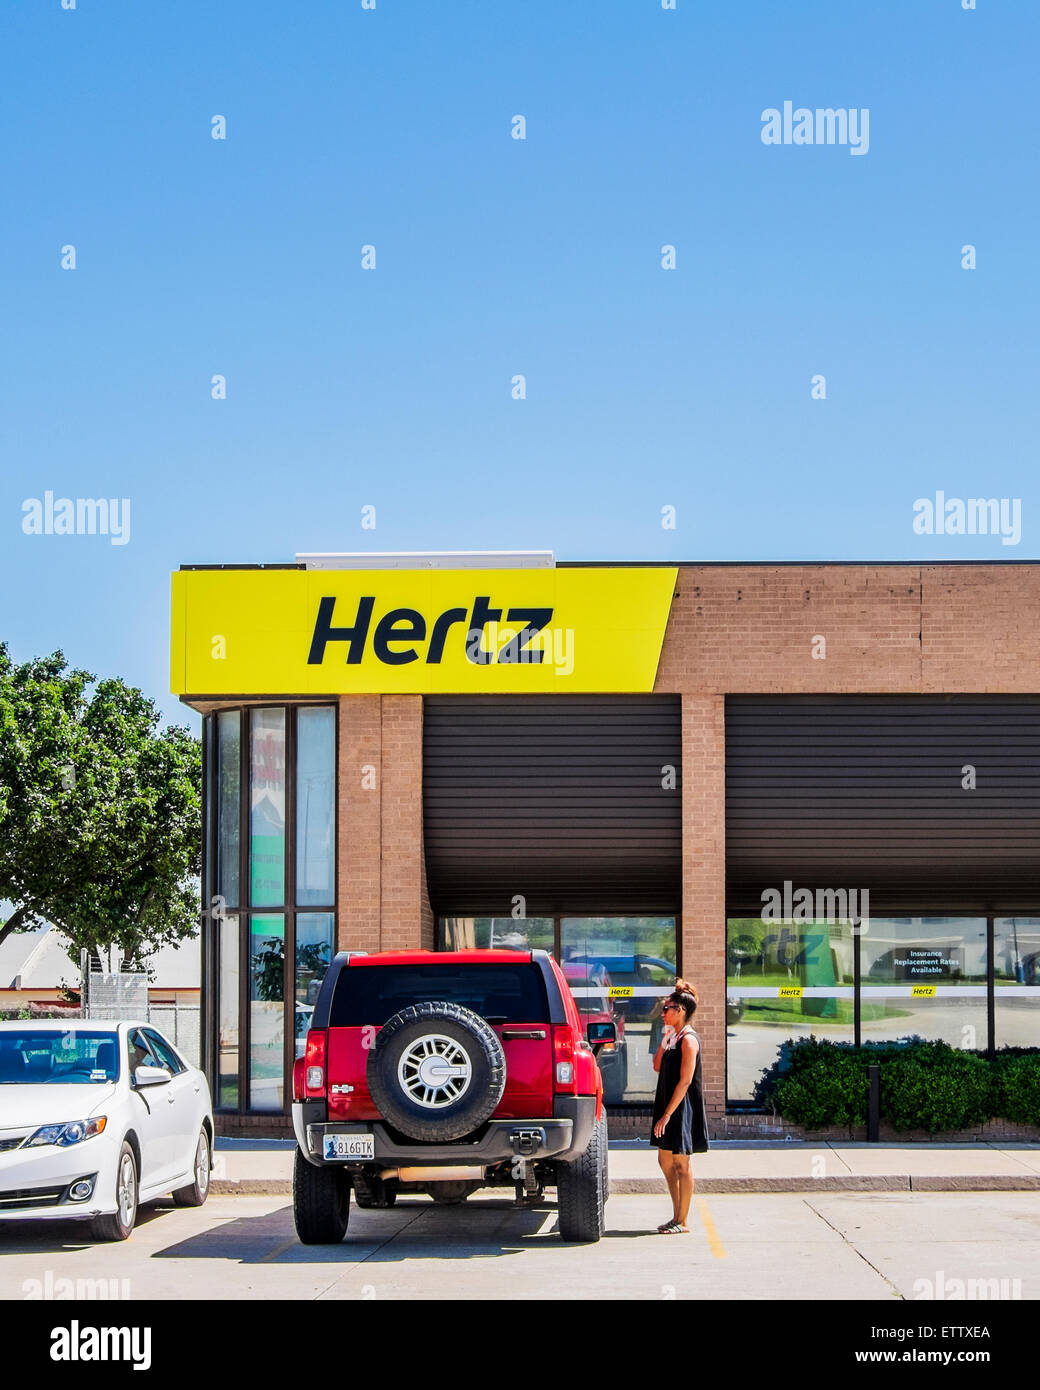 The exterior storefront of a Hertz automobile rental store with a customer in front. Oklahoma City, Oklahoma, USA. Stock Photo